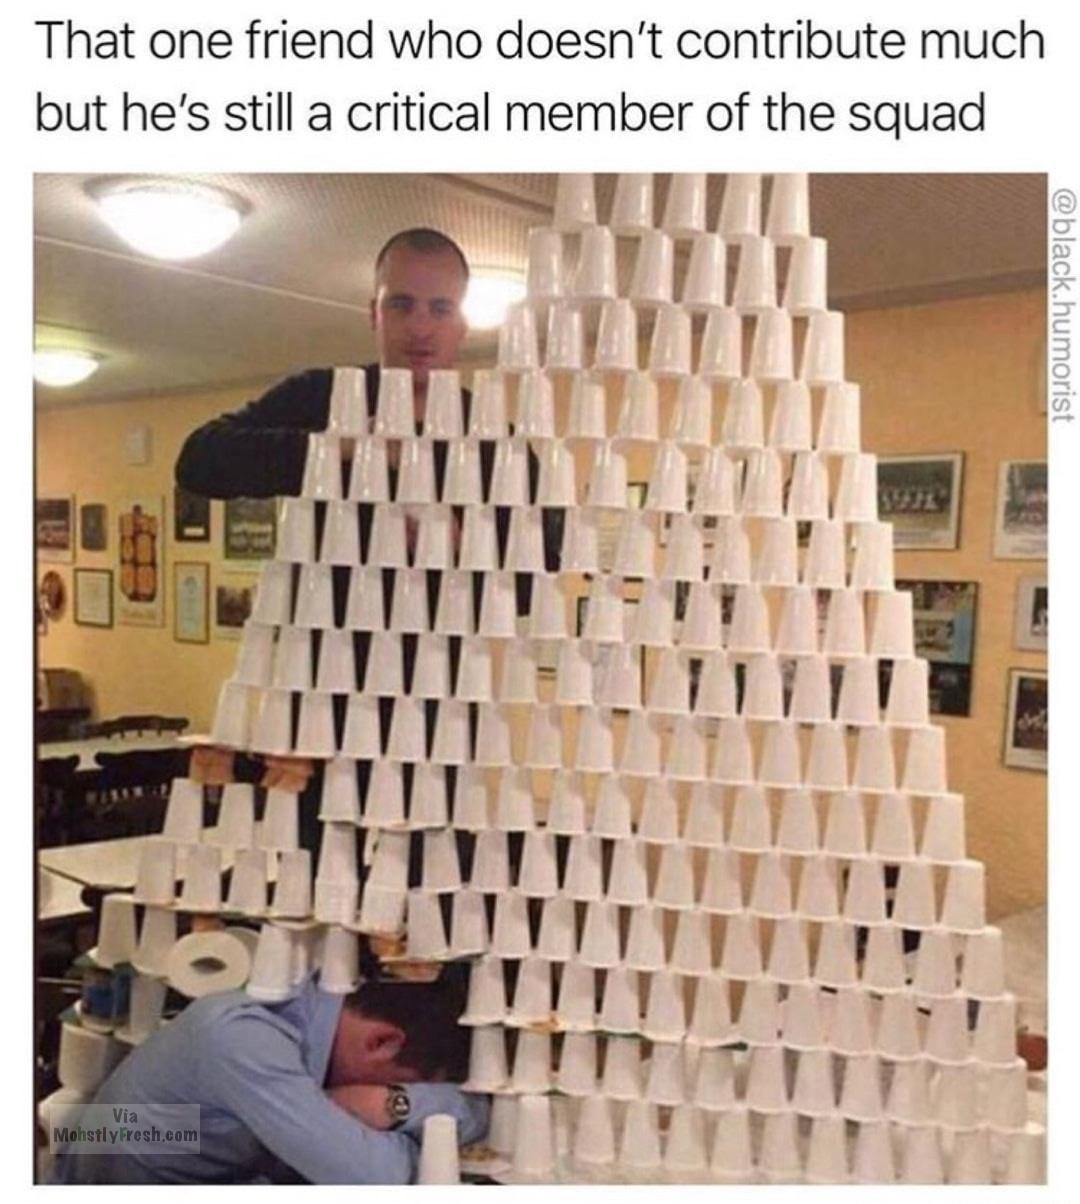 people who have to much free time - That one friend who doesn't contribute much but he's still a critical member of the squad .humorist Via Mohstly Fresh.com